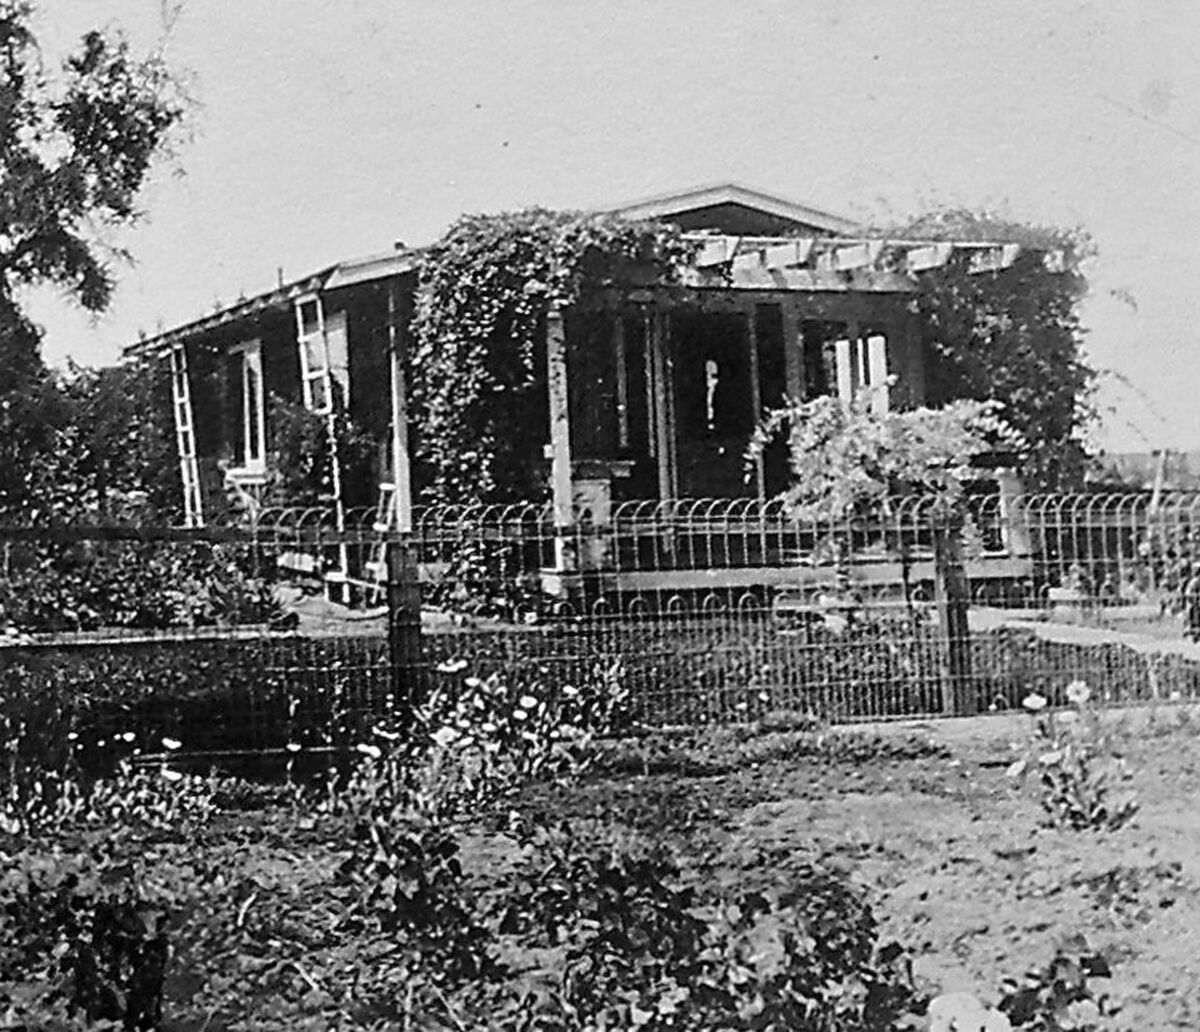 Ocean Beach's Wisteria Cottage, built in 1907 and first owned by John and Minnie Clarke, is pictured in 1921.